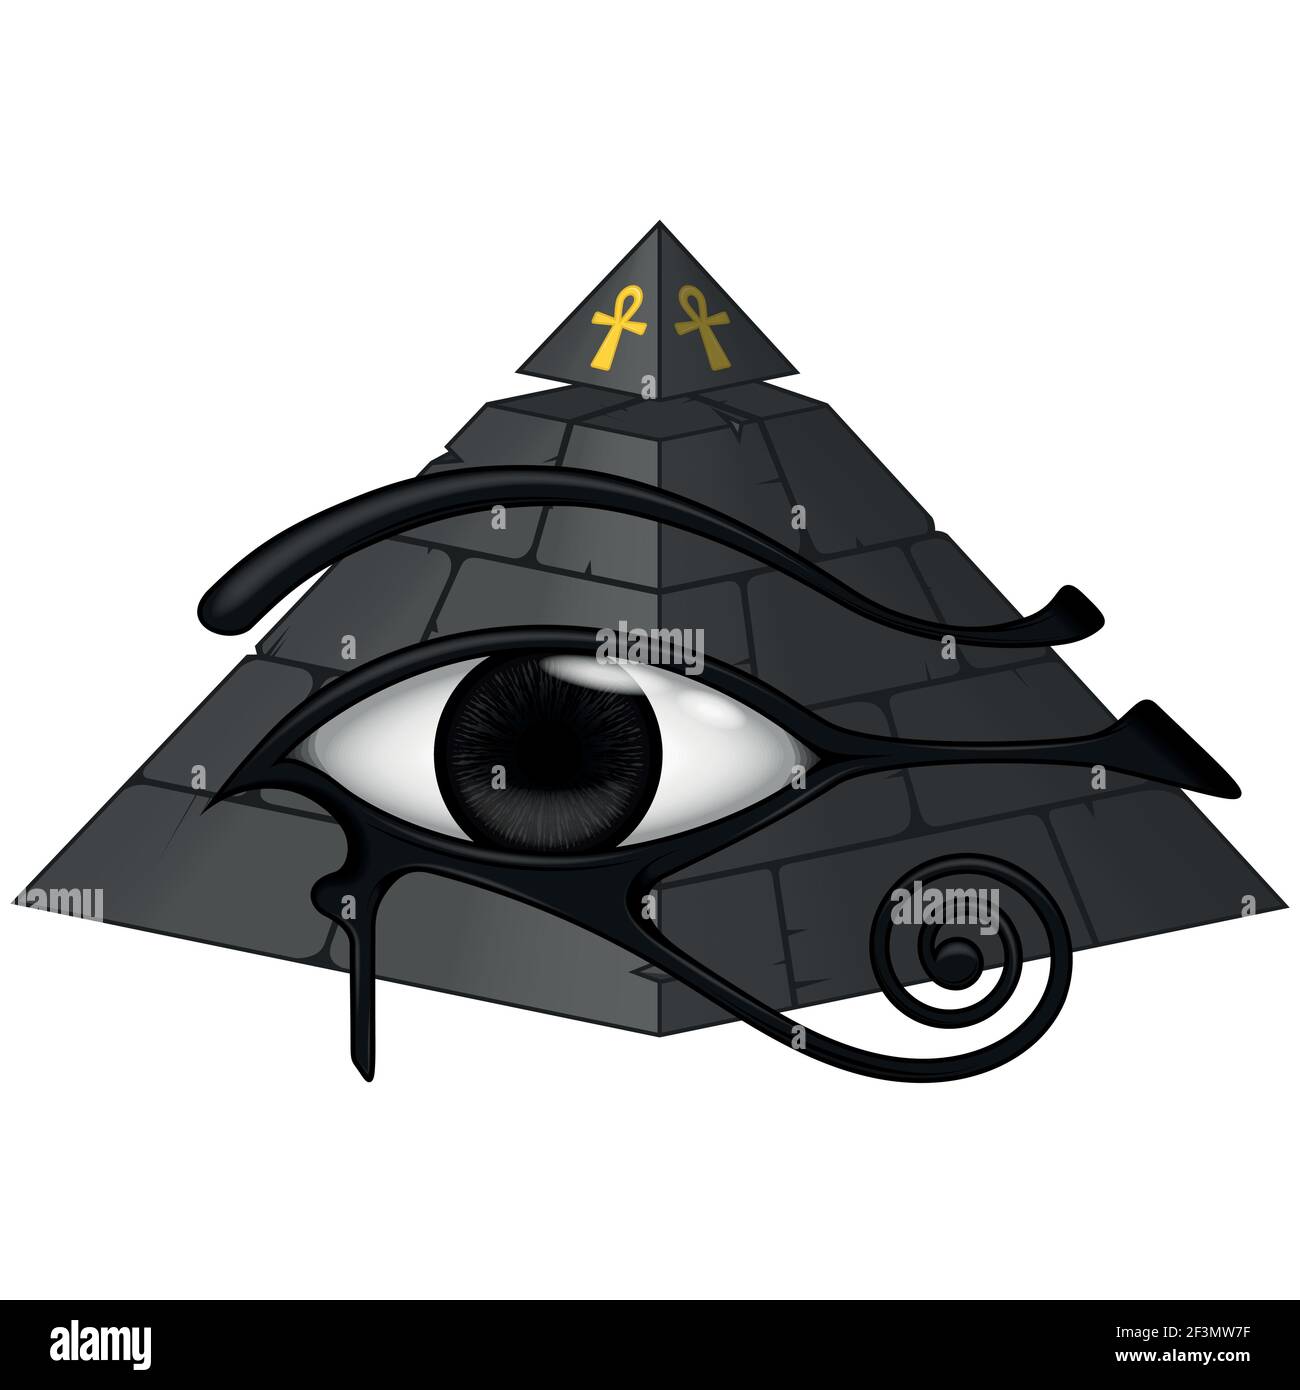 Vector design of ancient egyptian pyramid with 3d eye of horus, ancient egyptian symbols, eye of horus, looped cross, all on white background. Stock Vector